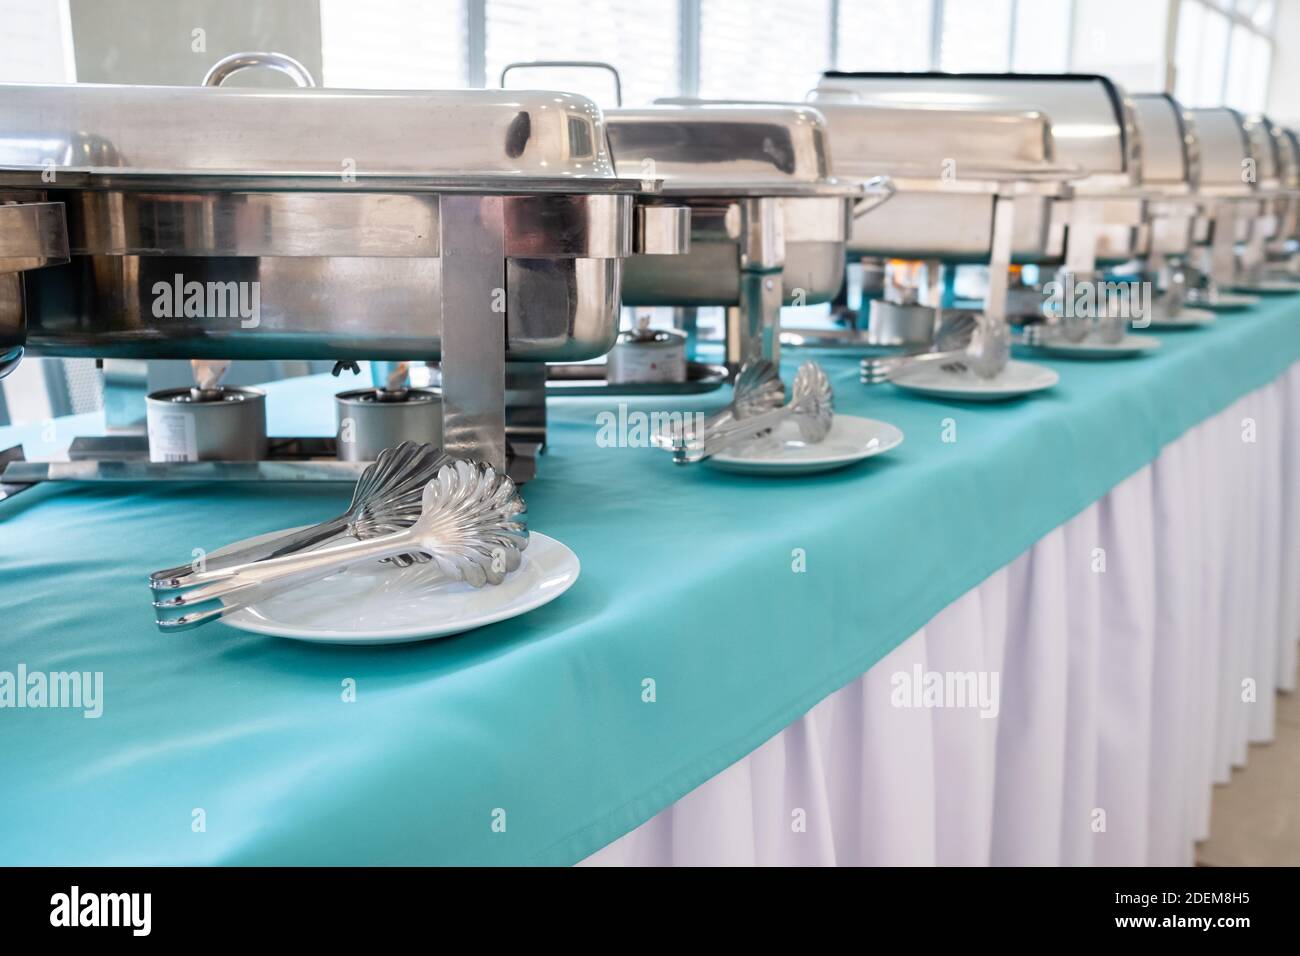 Shiny metal food warmers, stacks of plates and other kitchen equipment on  the table for a gourmet banquet or other service event. Catering Stock  Photo - Alamy